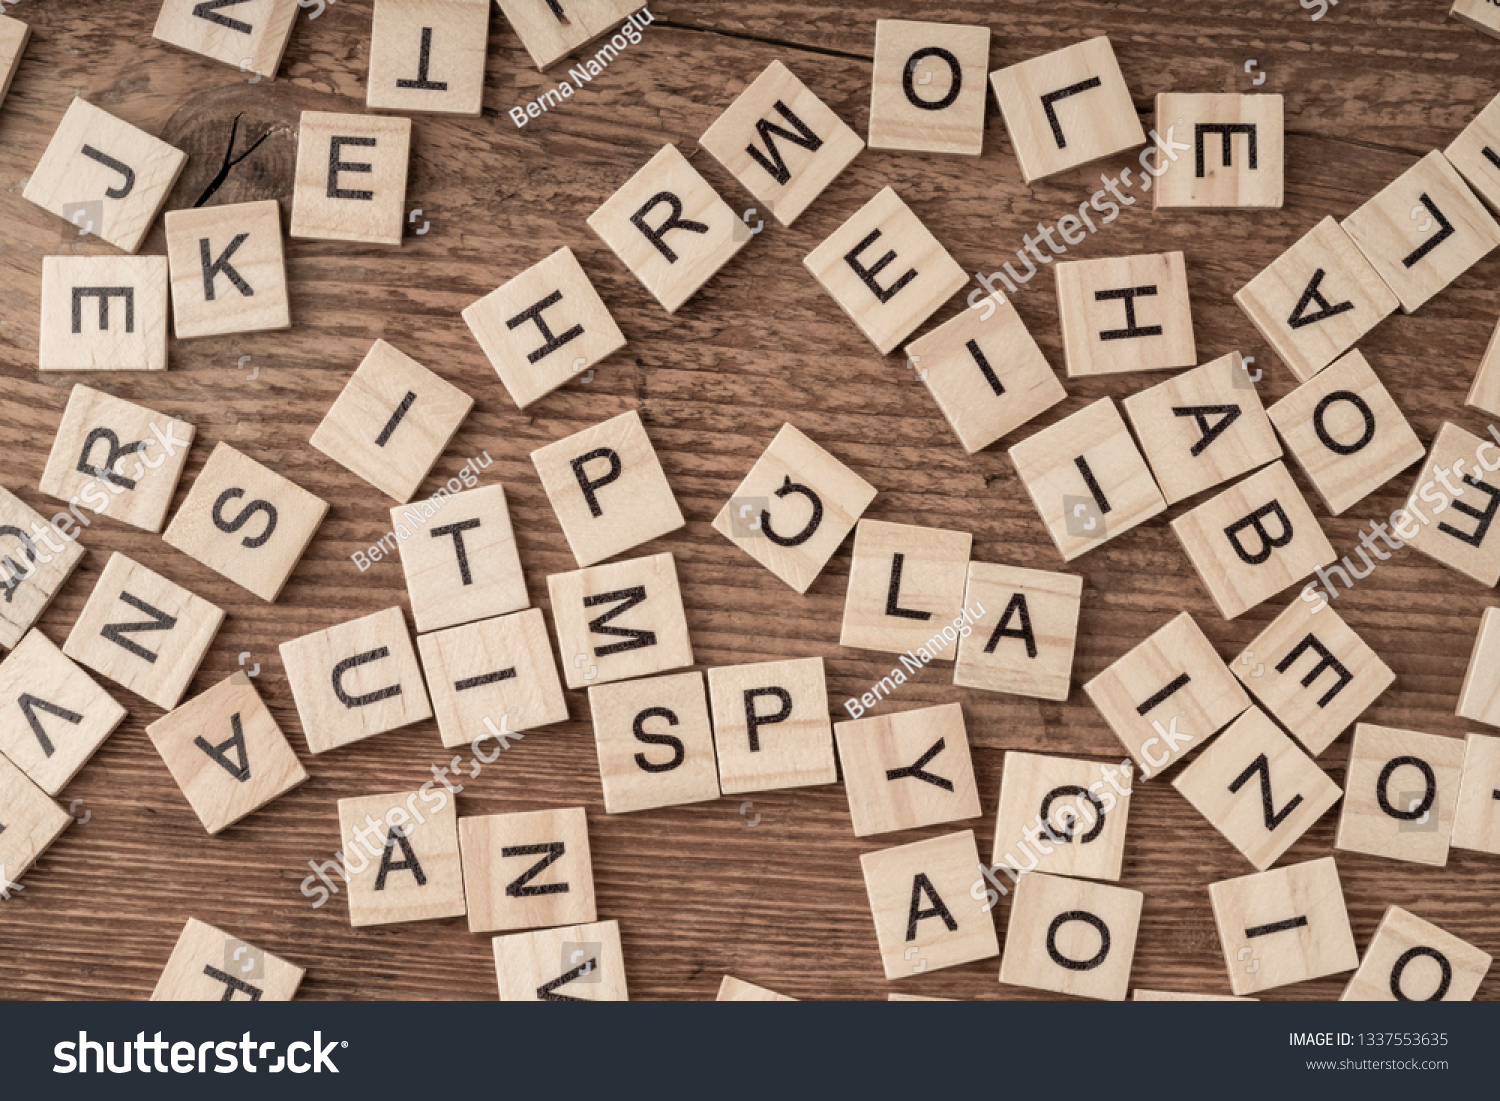 alphabets on wooden cubes as a background #1337553635